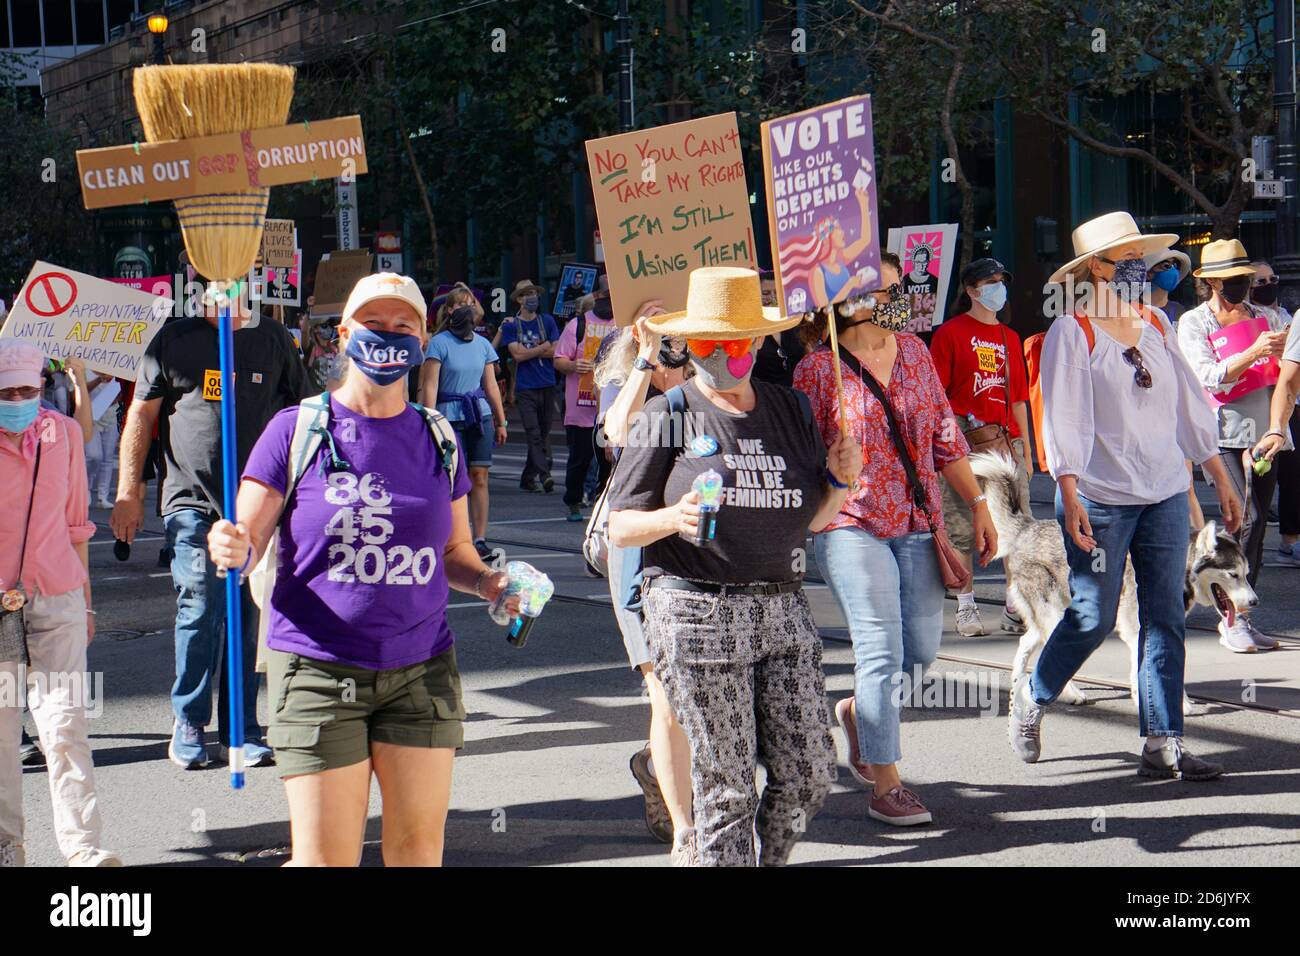 October 17, 2020. San Francisco Women's March before the USA Presidential Election. Protesters carry Vote, anti-Trump, and women's rights signs. Stock Photo